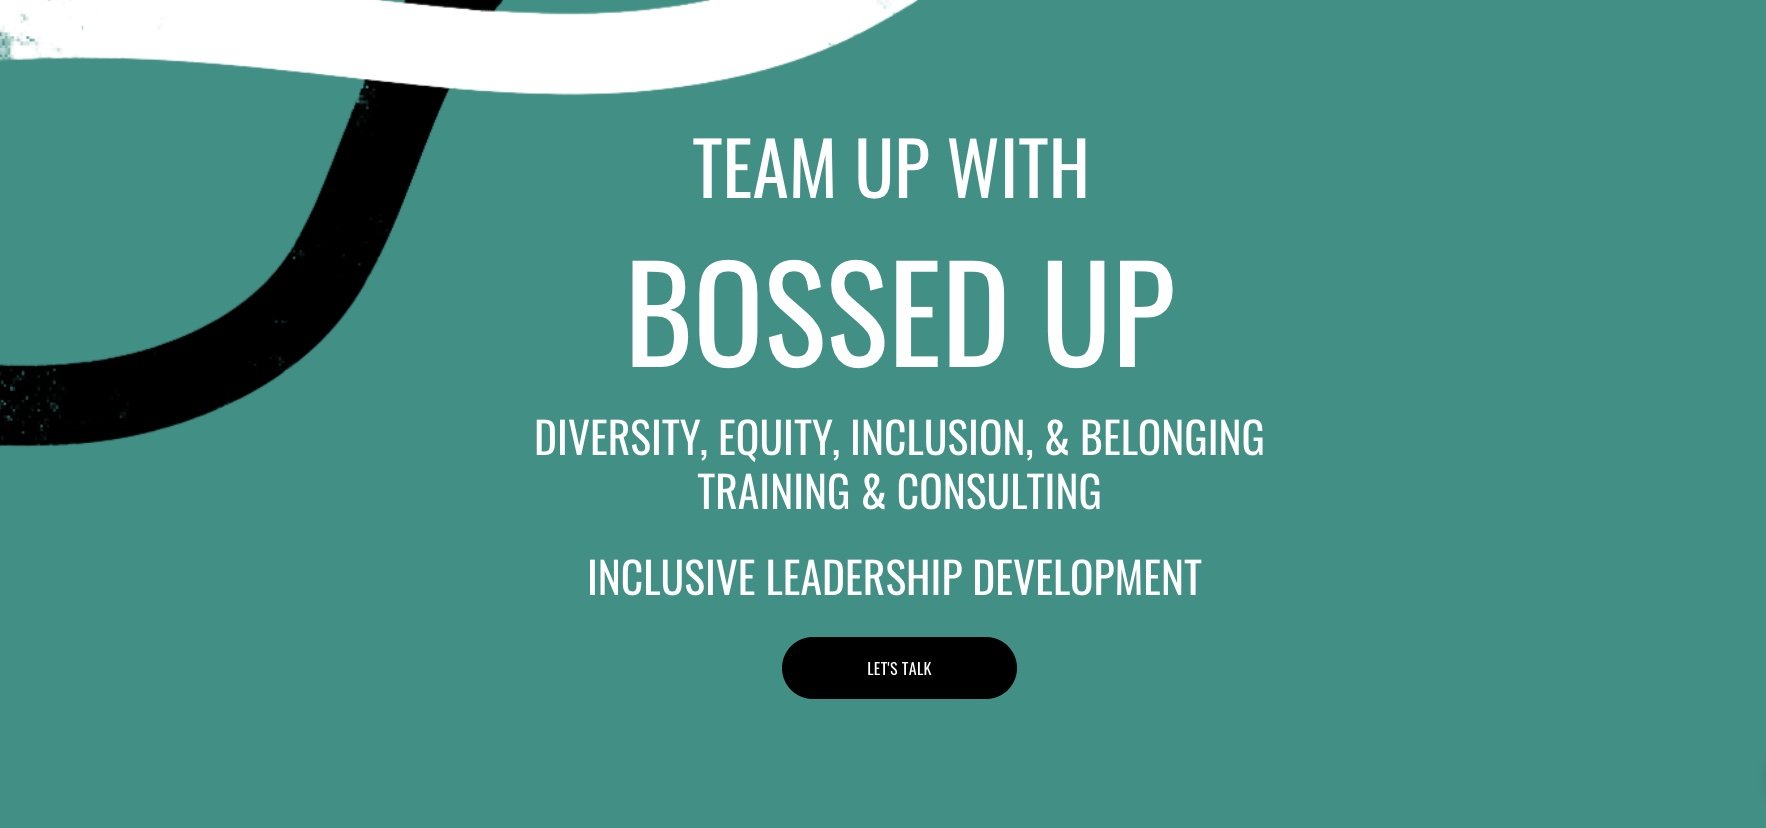 team up with bossed up for your team